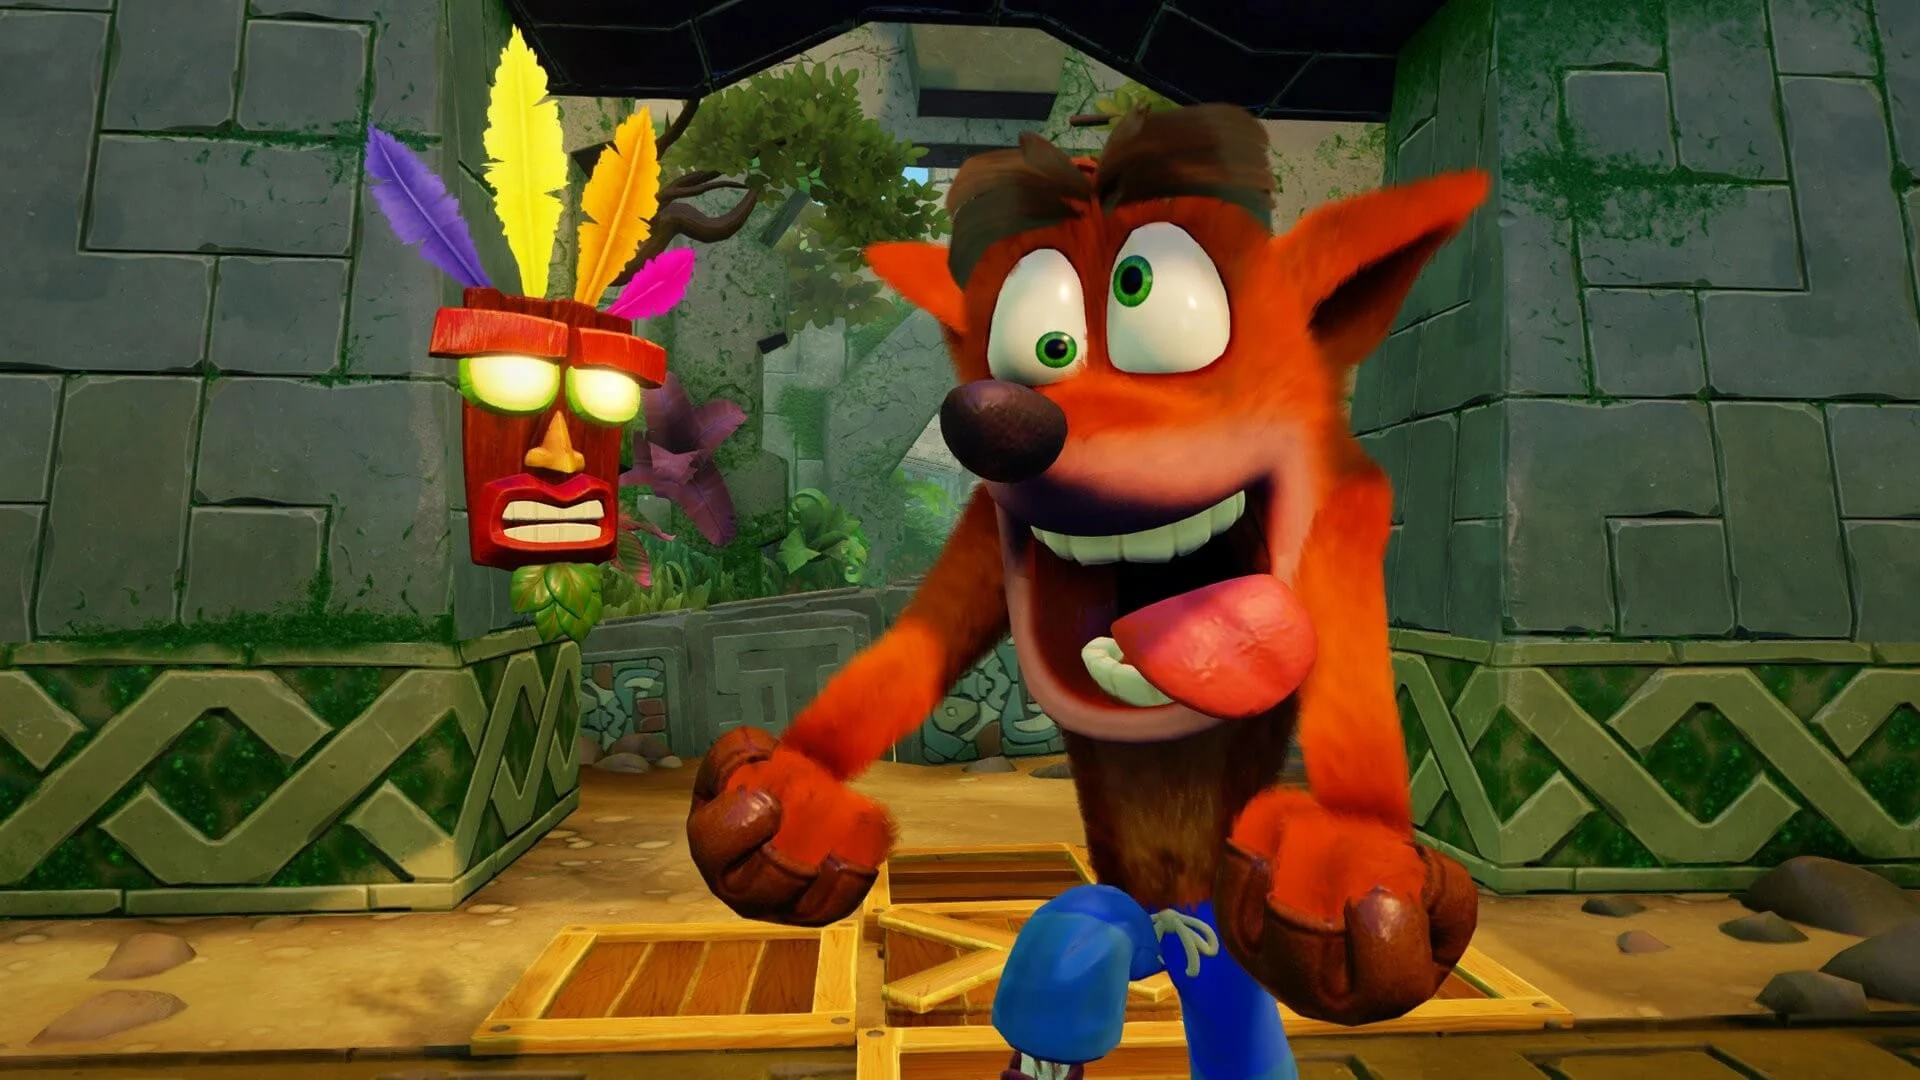 theres a possibility that crash bandicoot could join the smash bros ultimate roster